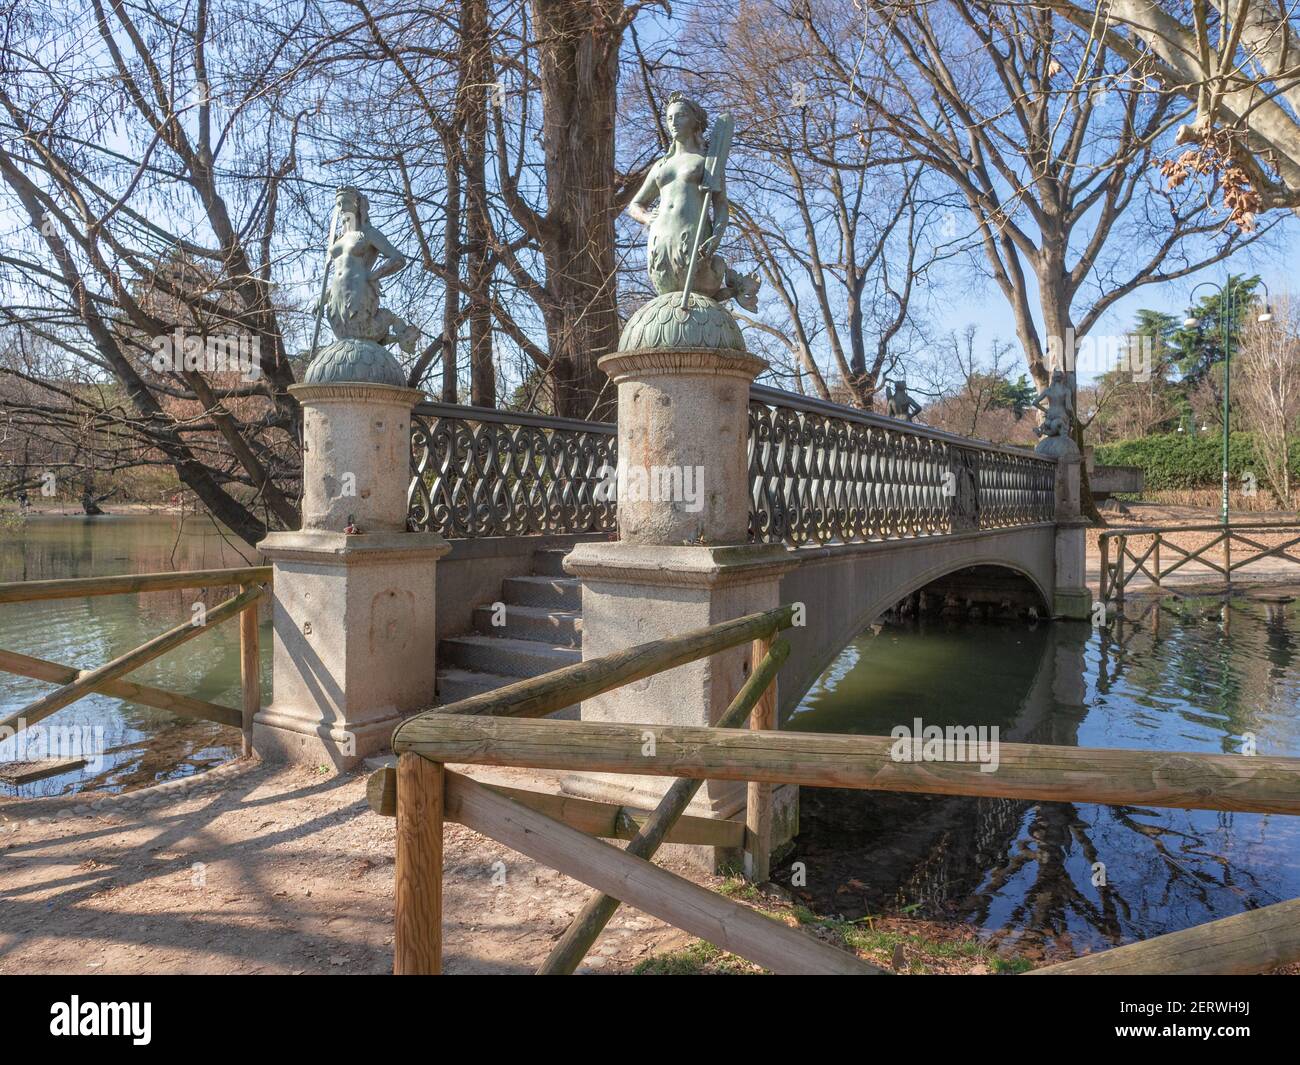 Ponte delle Sirenette,Mermaids Bridge, is a cast iron pedestrian bridge dating back to 1842 and relocated in the Sempione park after the canals were b Stock Photo